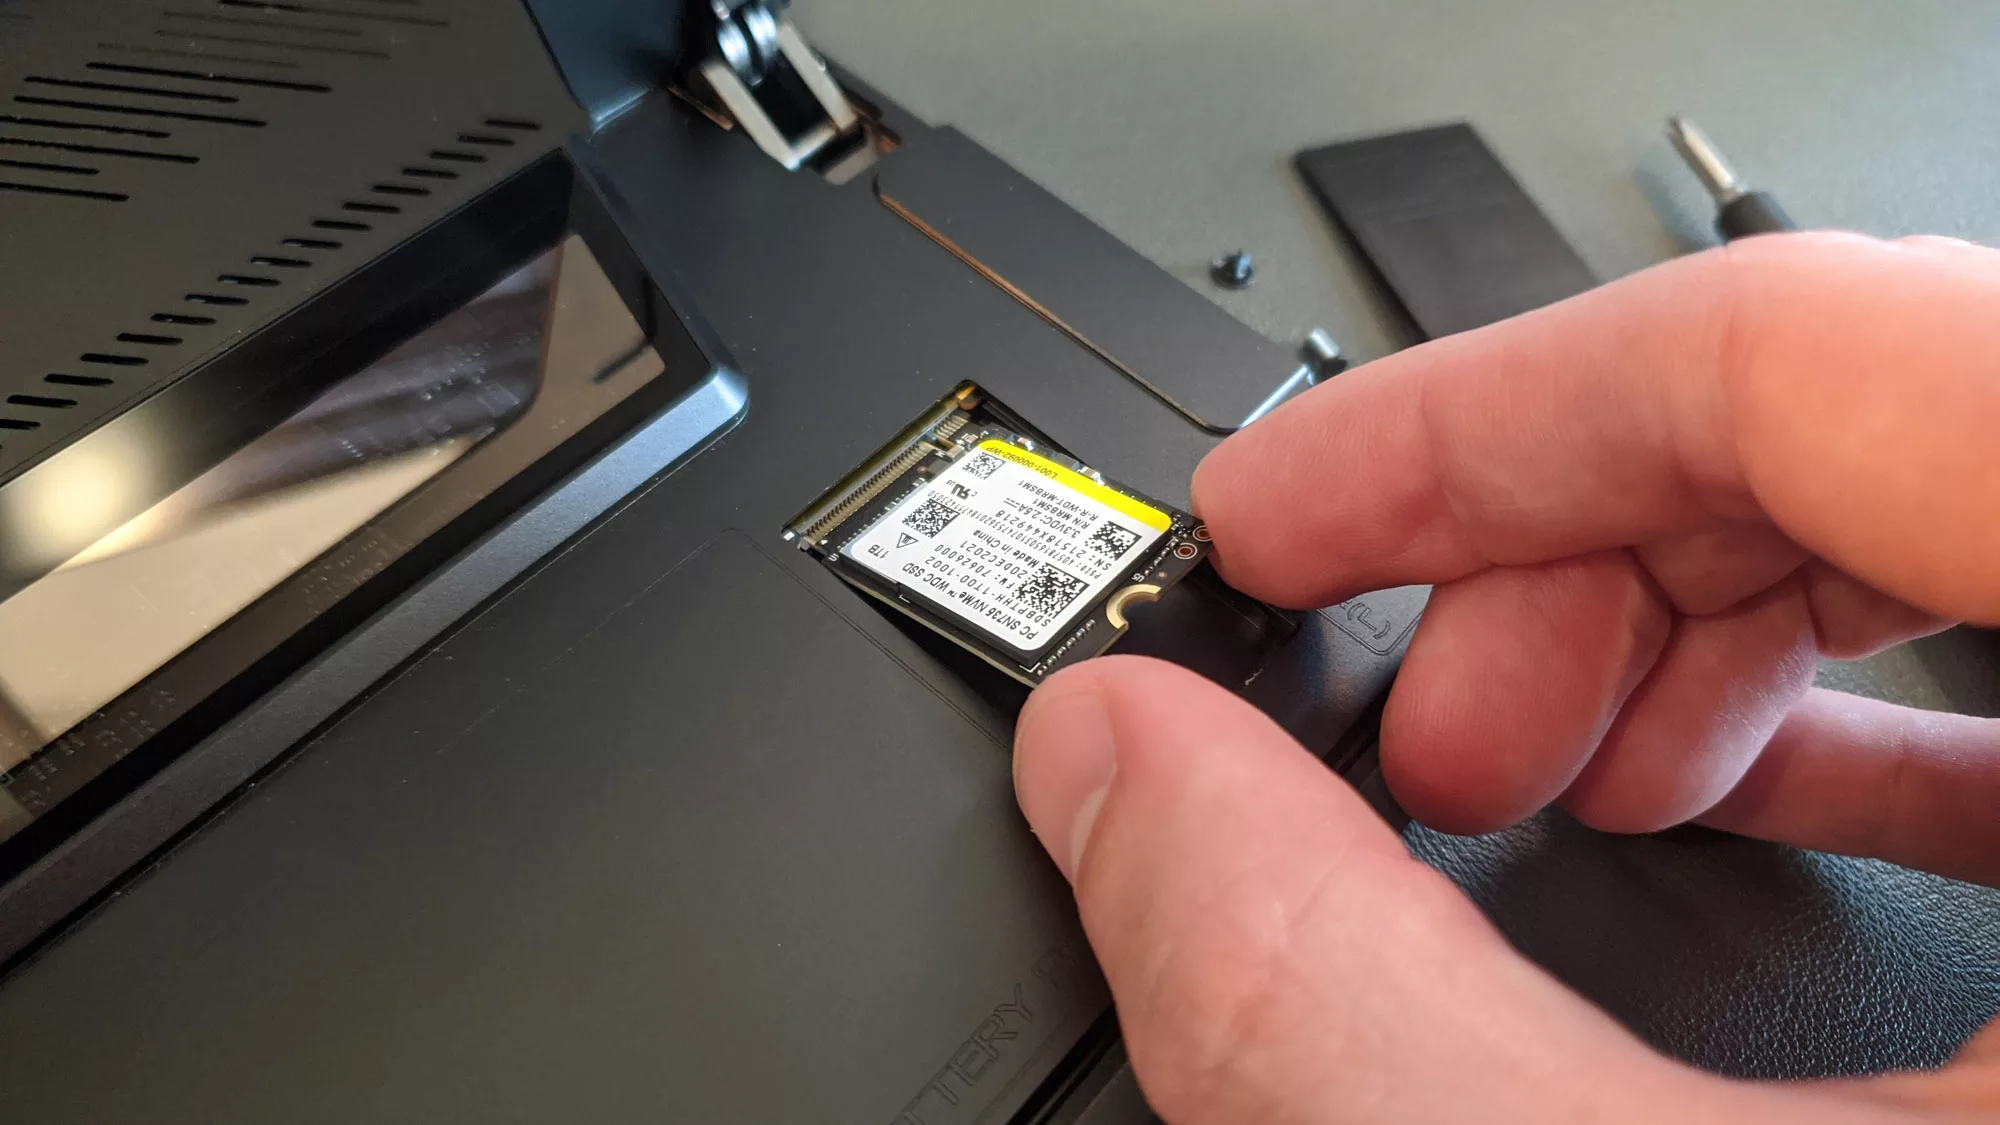 A photo of a hand removing the SSD from the Flow Z13 tablet.